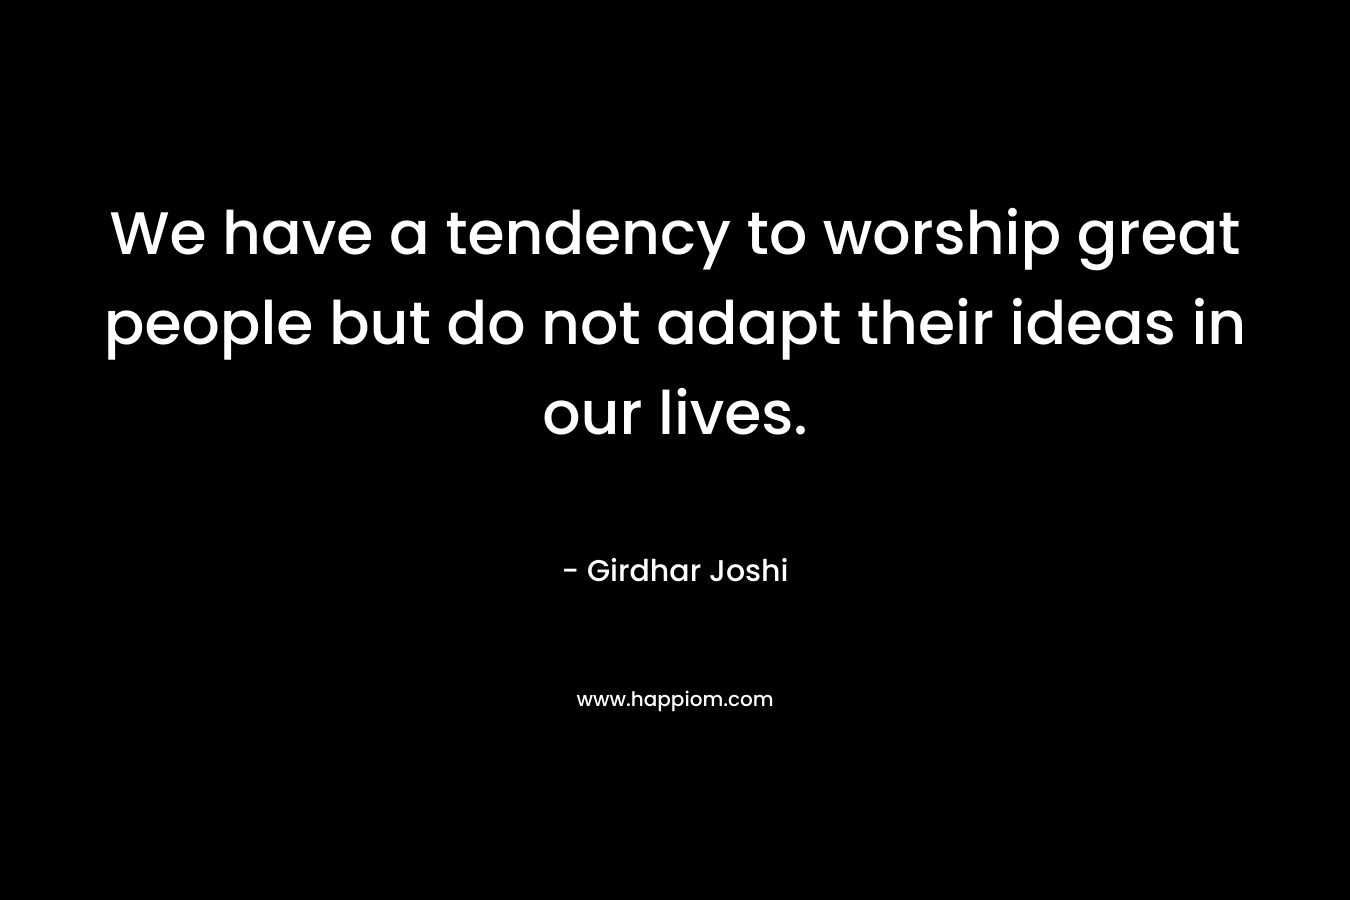 We have a tendency to worship great people but do not adapt their ideas in our lives. – Girdhar Joshi